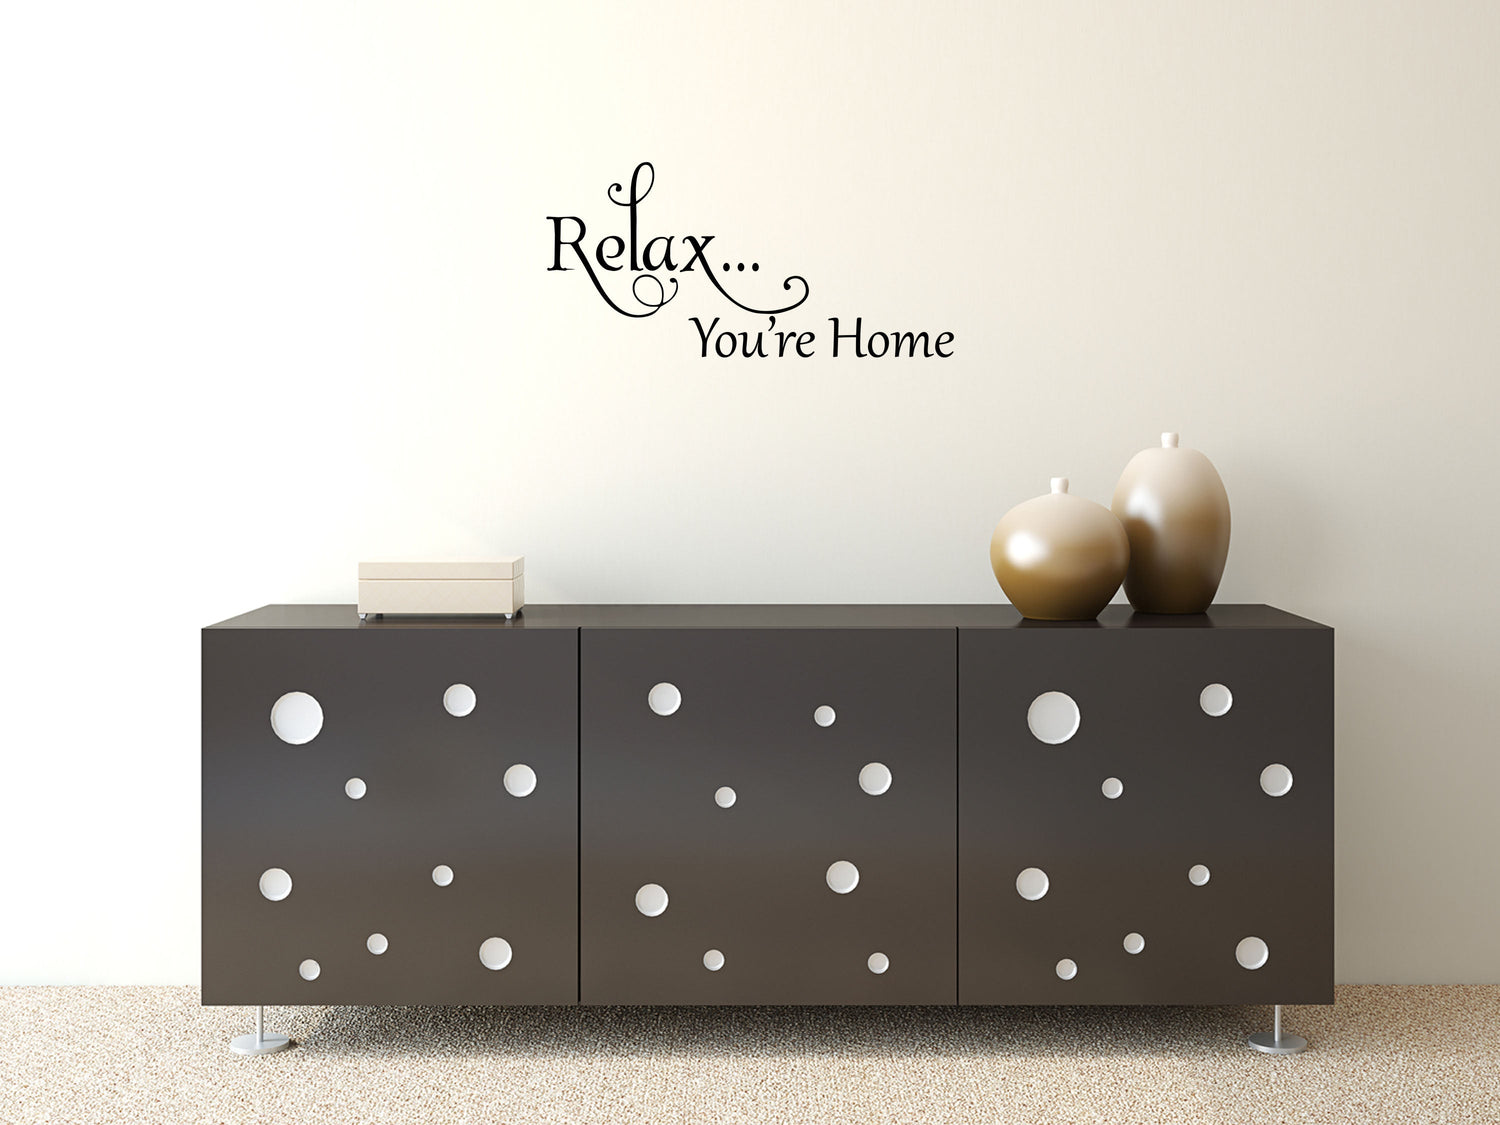 Relax You're Home - Inspirational Wall Decals Vinyl Wall Decal Inspirational Wall Signs 